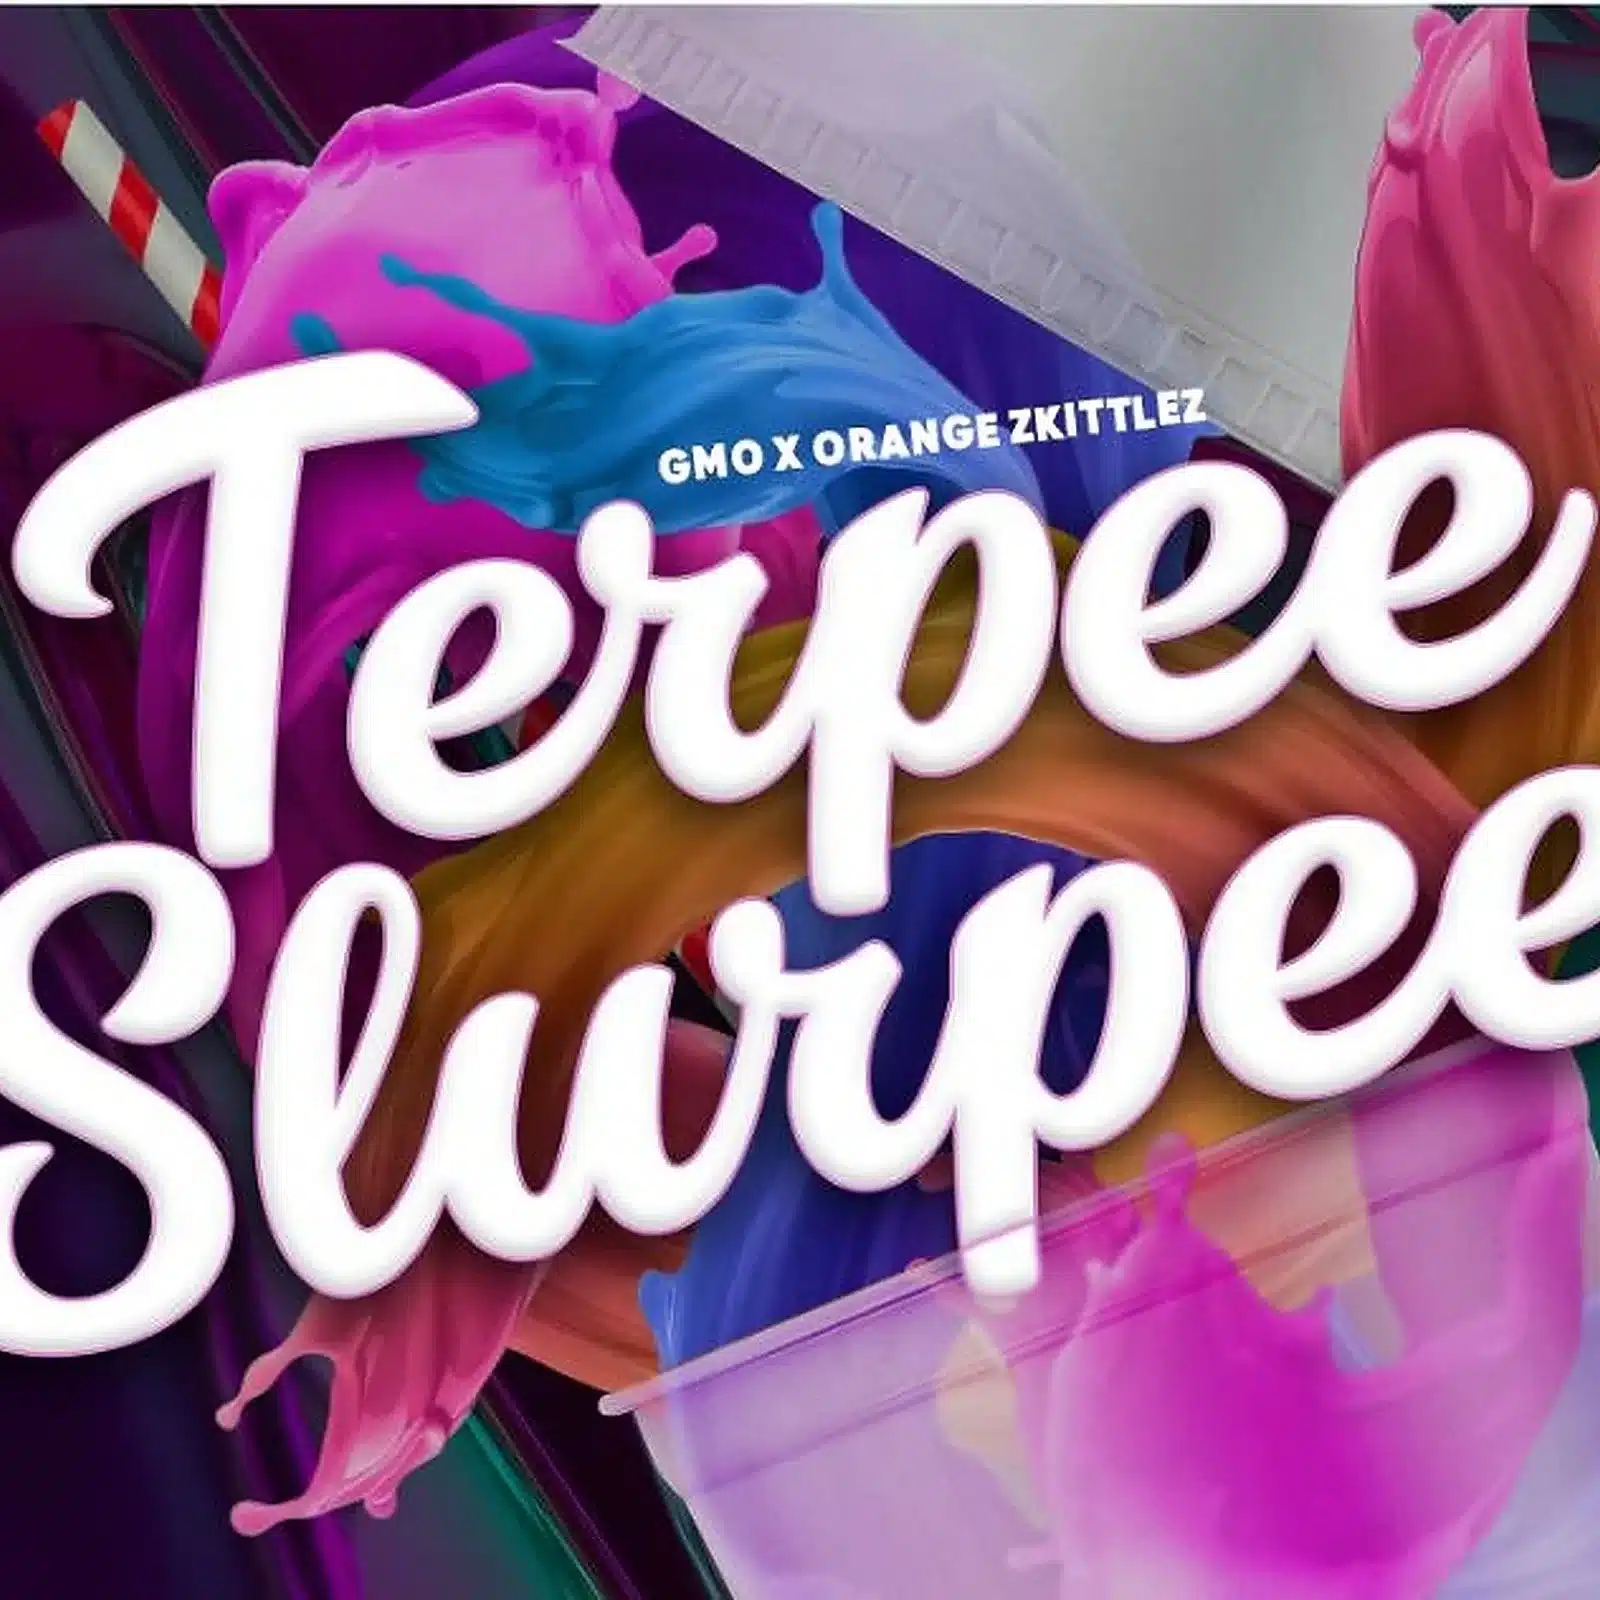 Indulge in a Tasty Experience with Qwest Terpene Slurpee Pre-Rolls from Giggles Cannabis